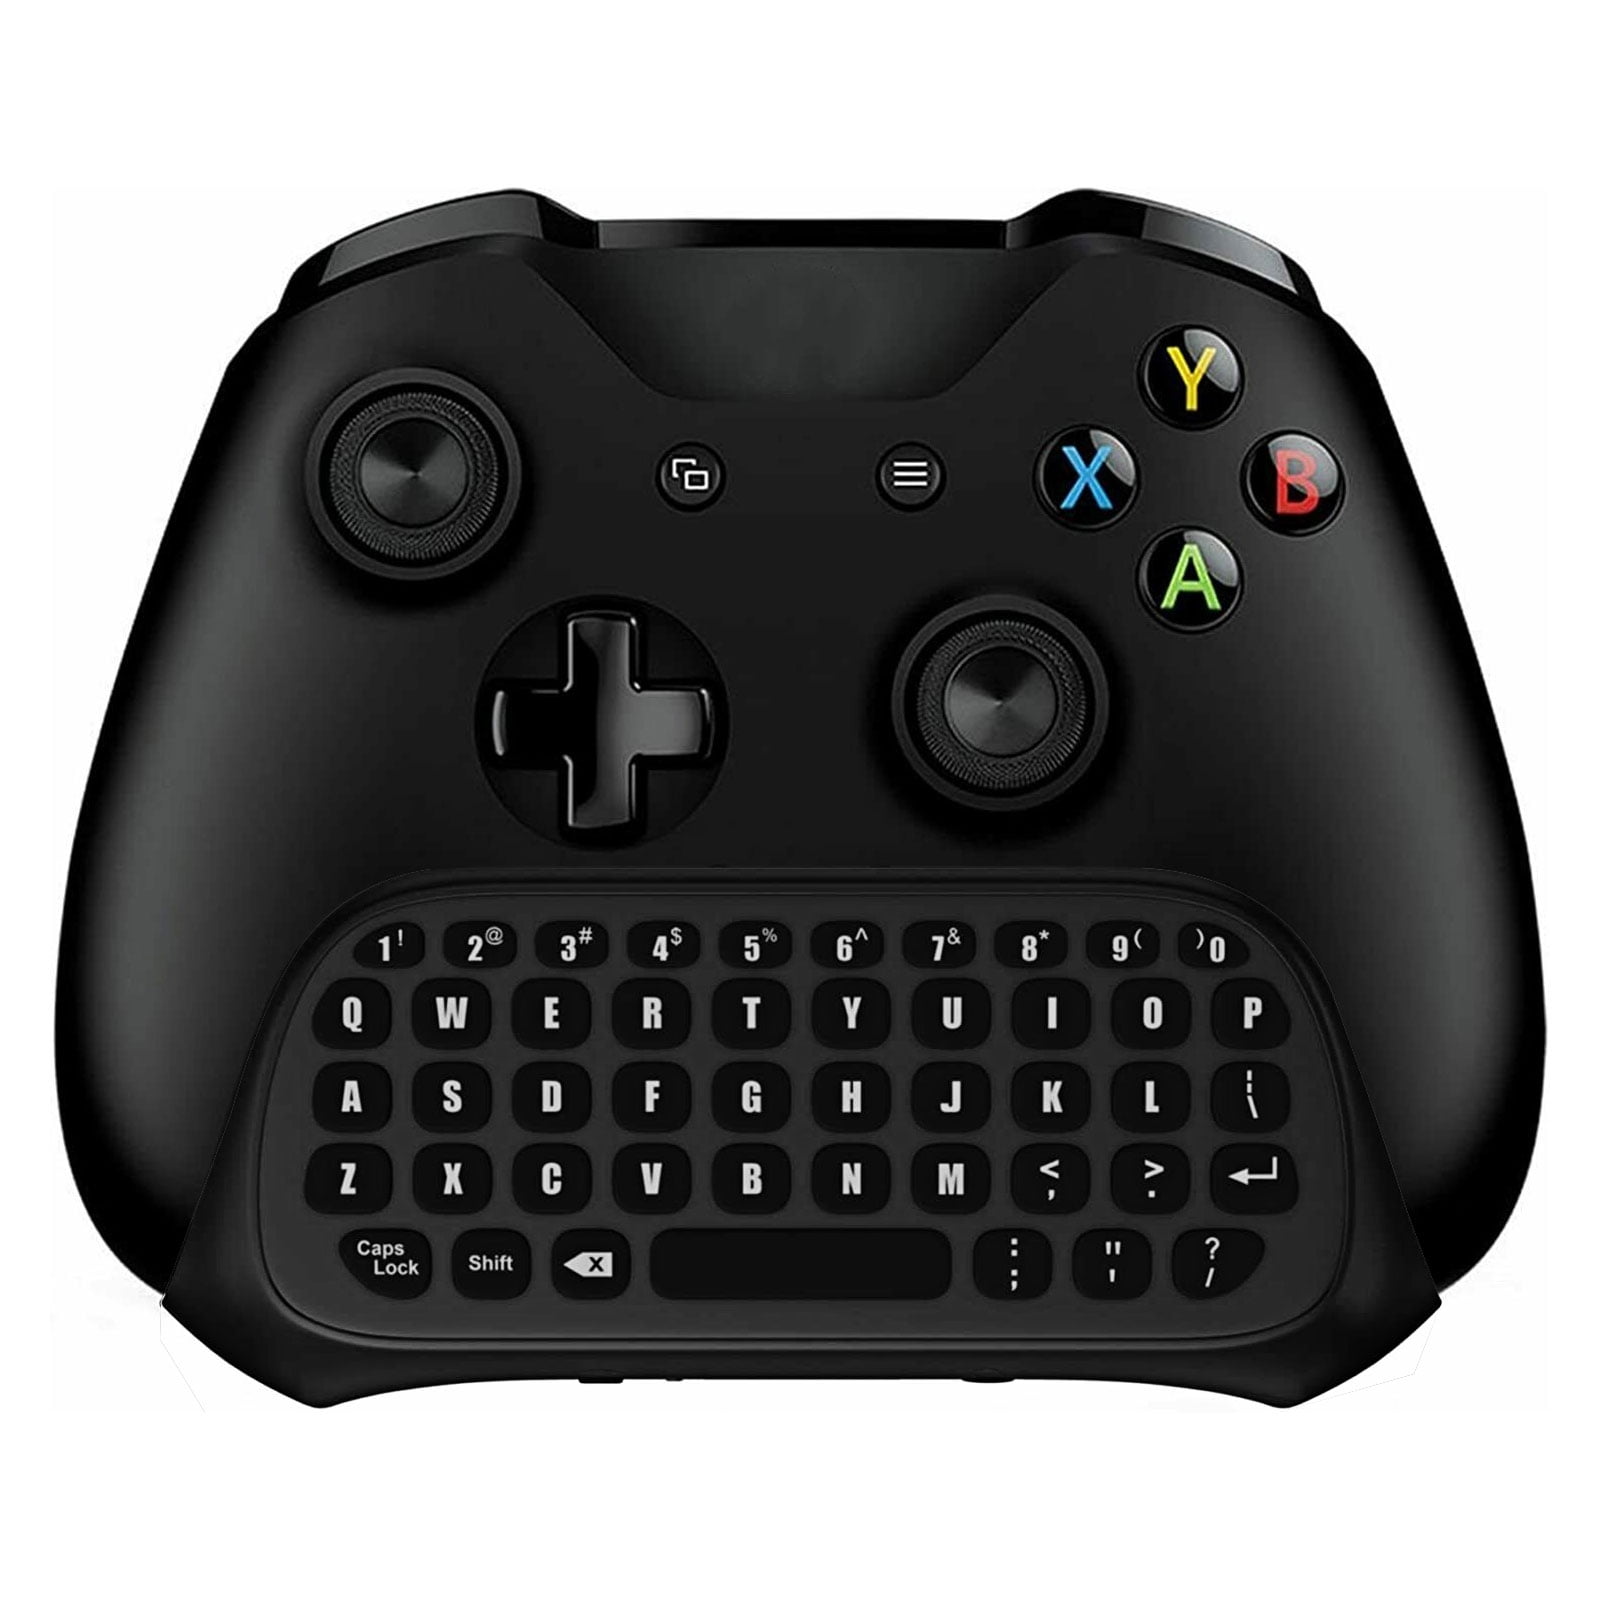 Wireless Keyboard Chatpad For Xbox One With 2 4g Receiver Wireless Game Message Keyboard Keypad Compatible With Xbox One S X Controllers With Audio Headphone Jack Walmart Com Walmart Com